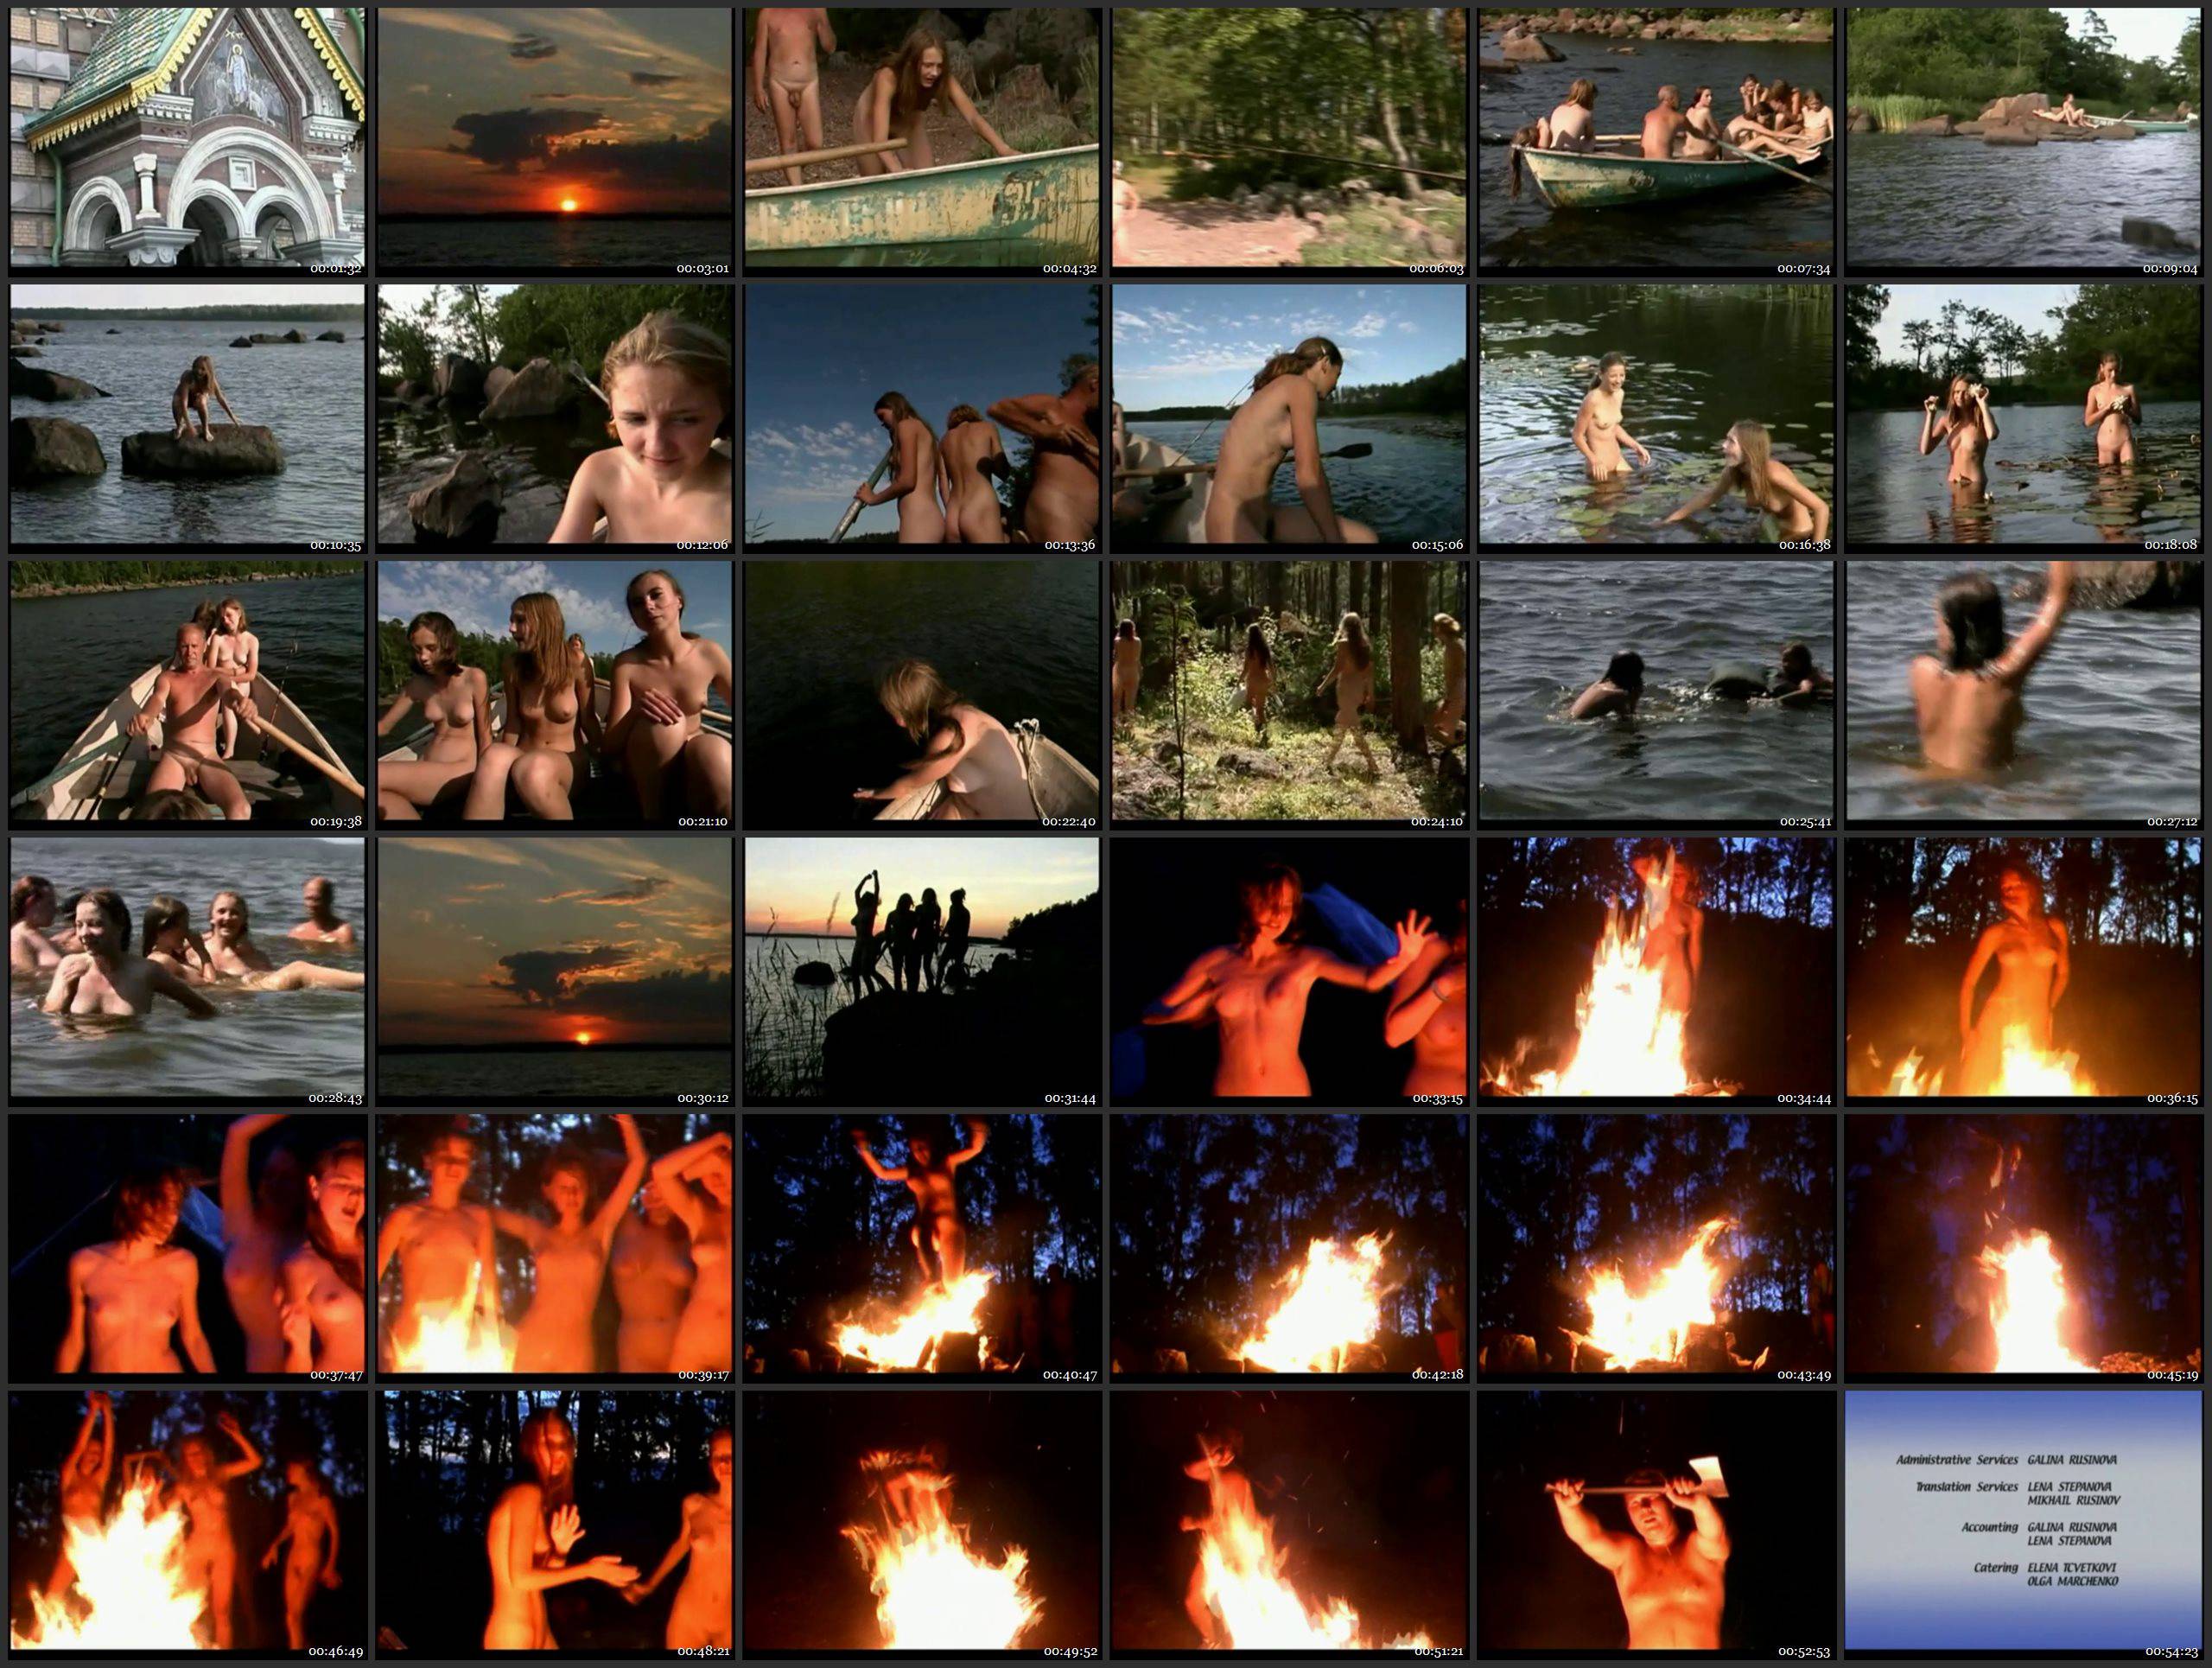 Enature.net Rituals Of Summer - Naturism in Russia 2000 Series - Thumbnails